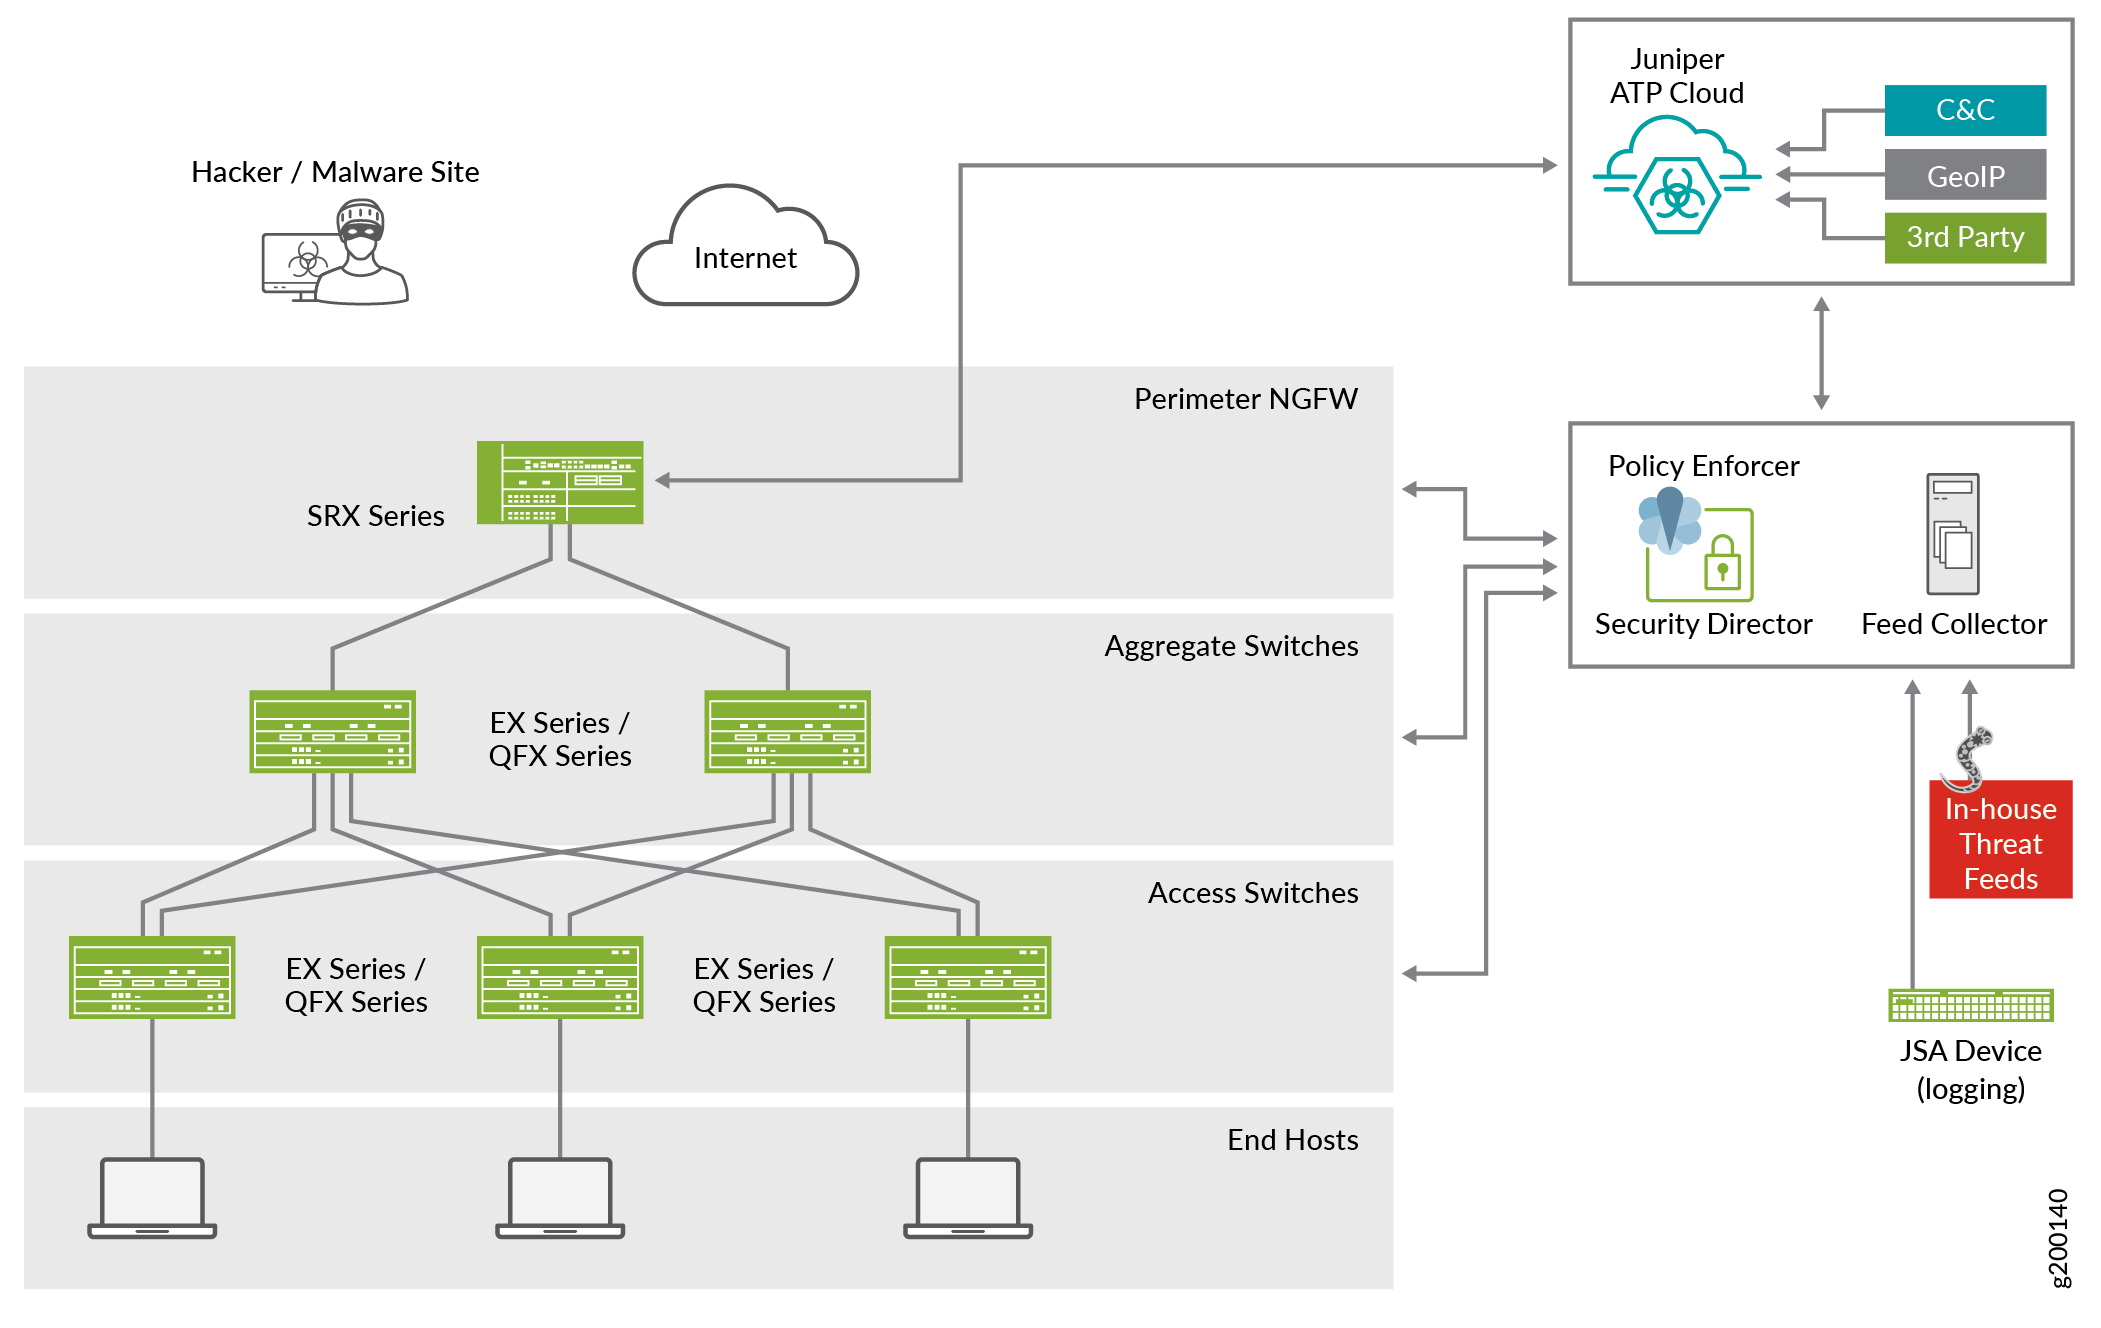 Juniper Connected Security Solution Components